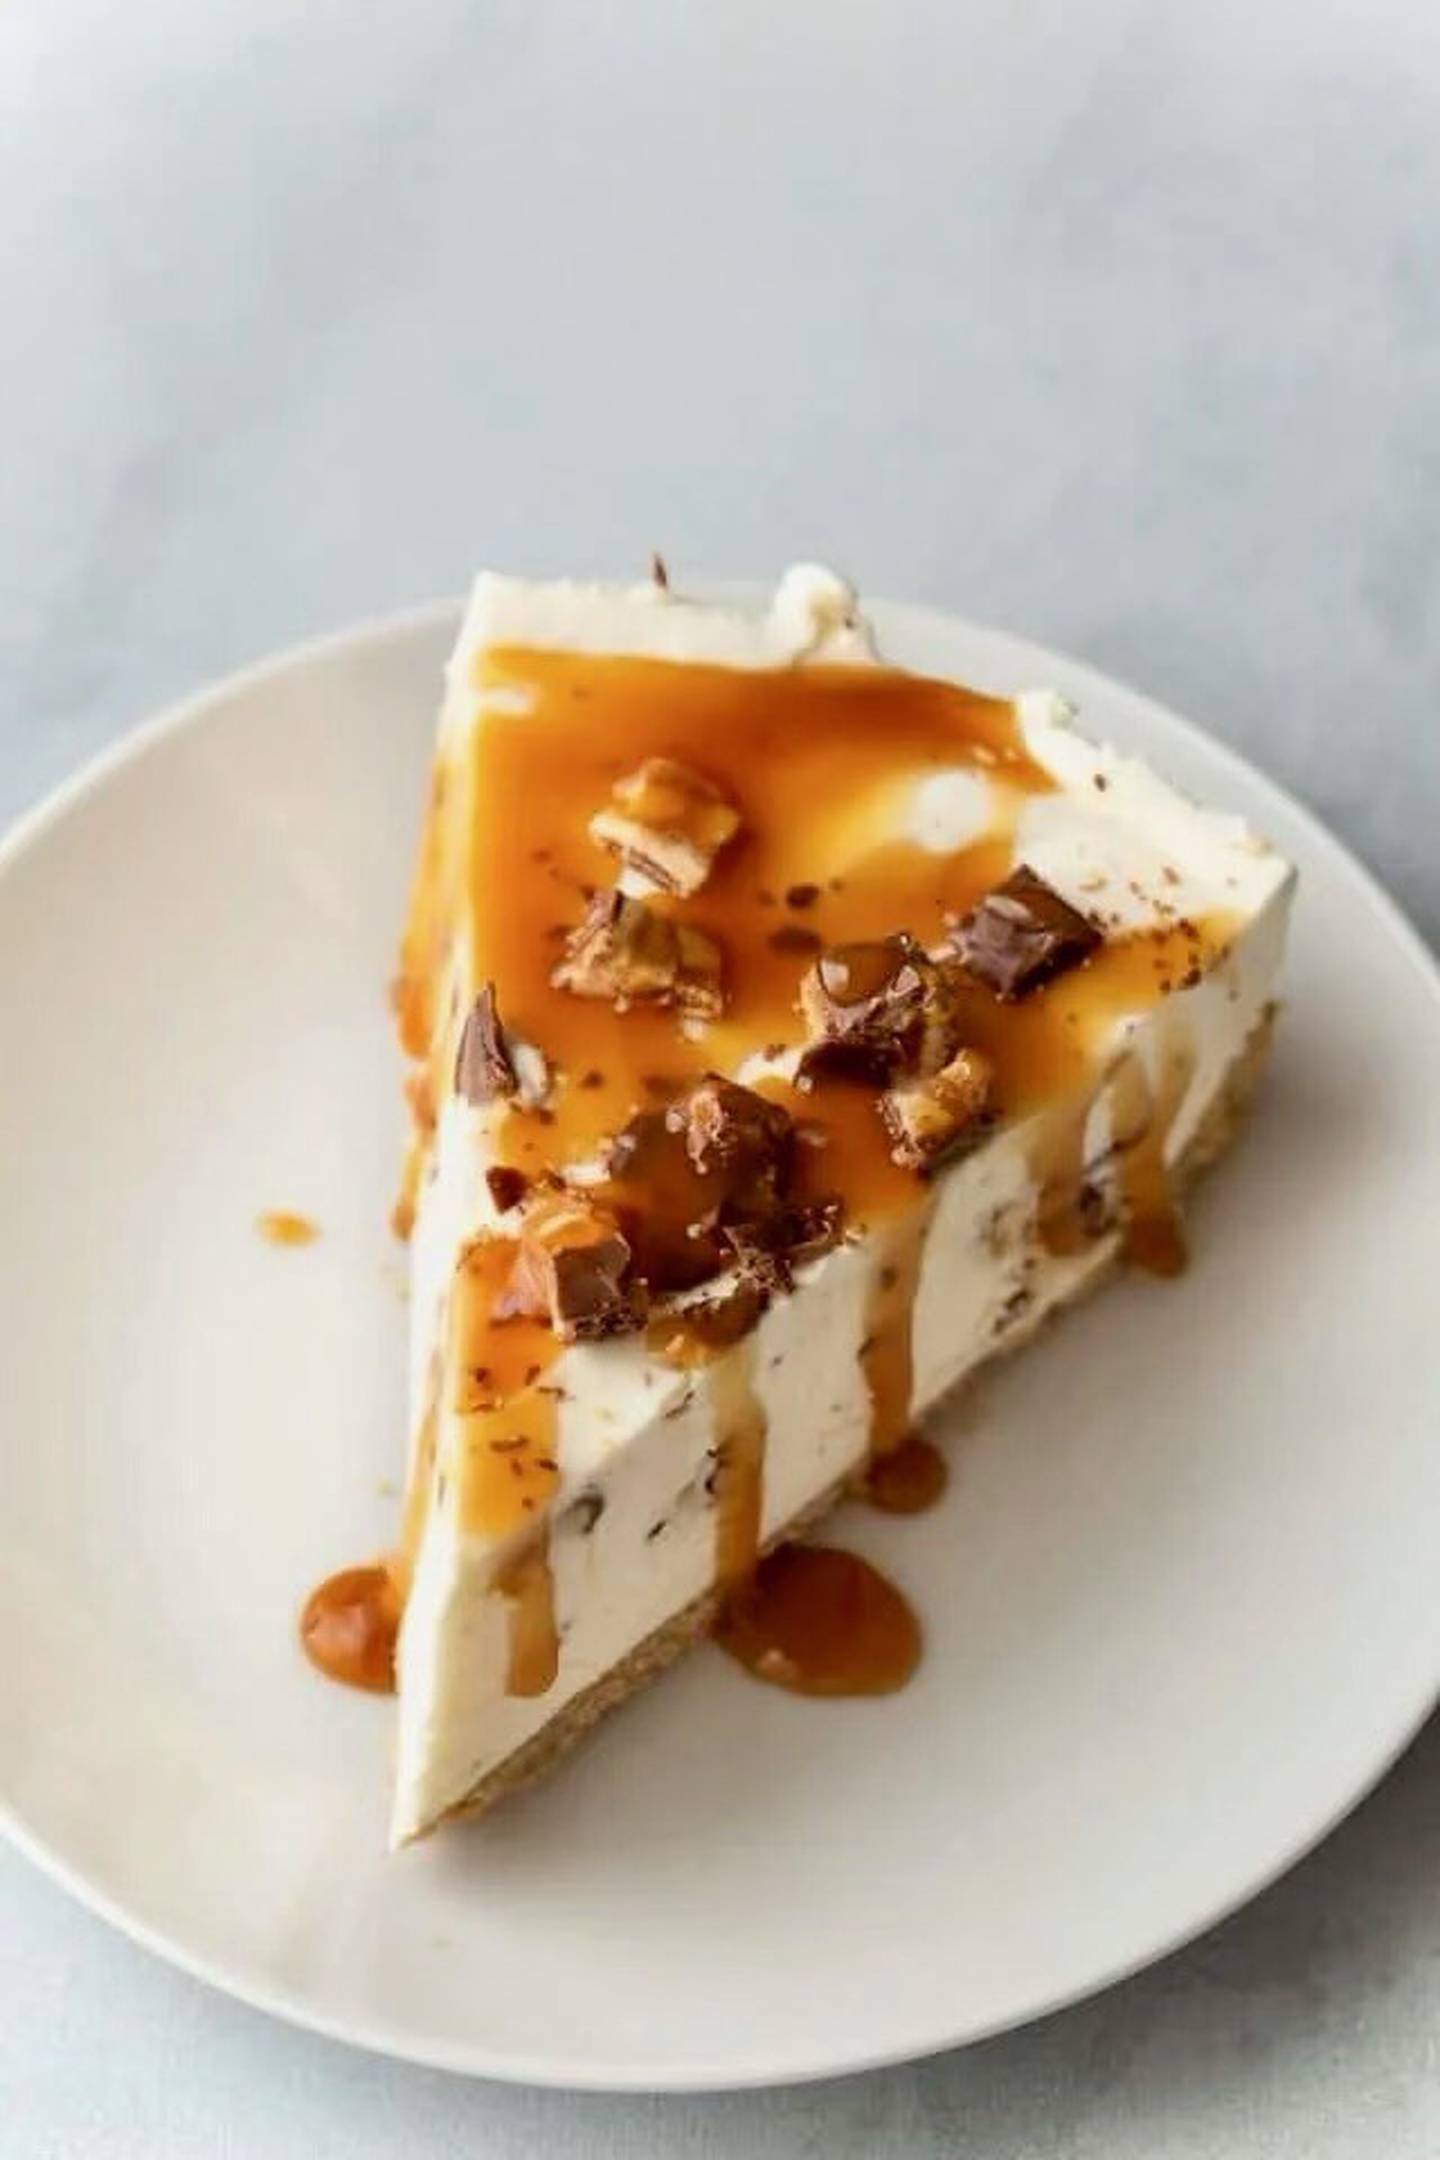 Graham said he enjoys experimenting with new techniques and discovering ways to push his baking skills forward. For the past few years, he has been perfecting his cheesecake recipe. (Pictured is his snickers cheesecake)